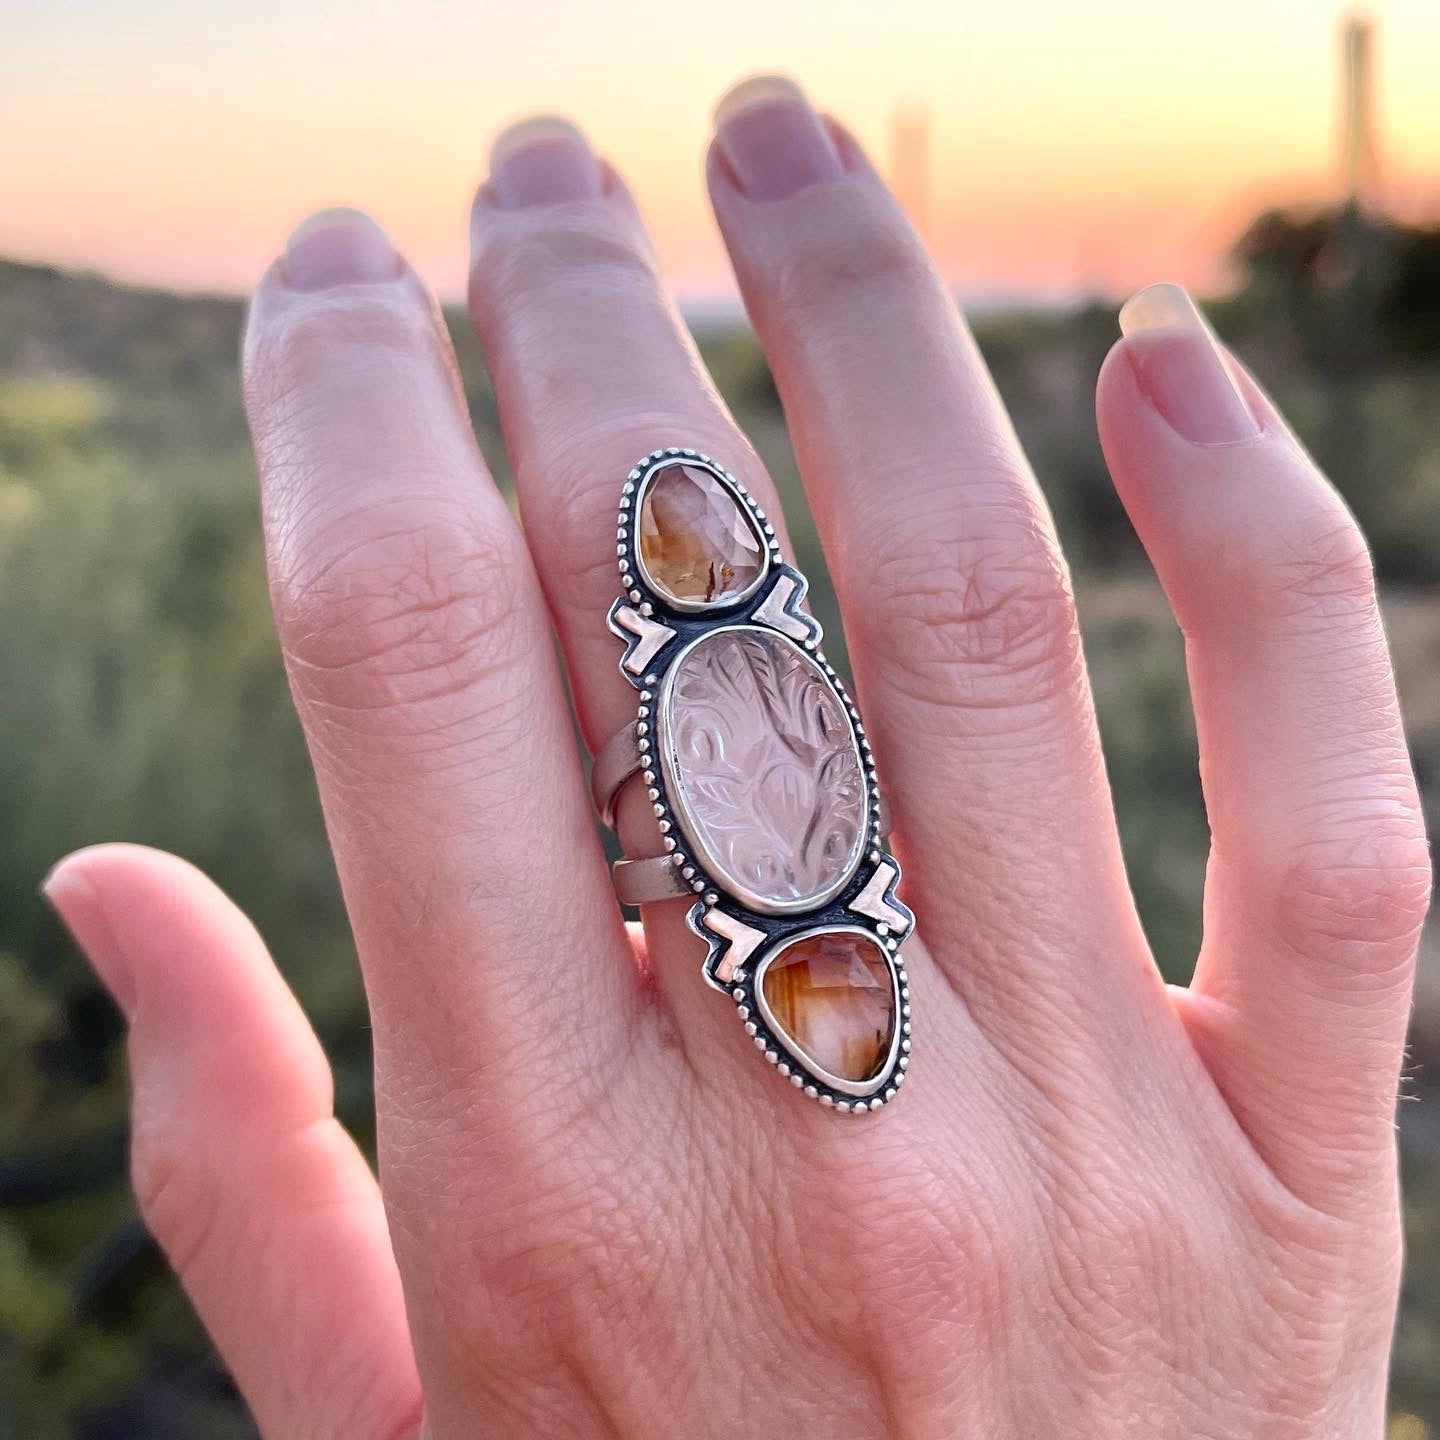 Carved Himalayan Quartz Stack Stone Ring // Size 8 (fits like a 7.5)